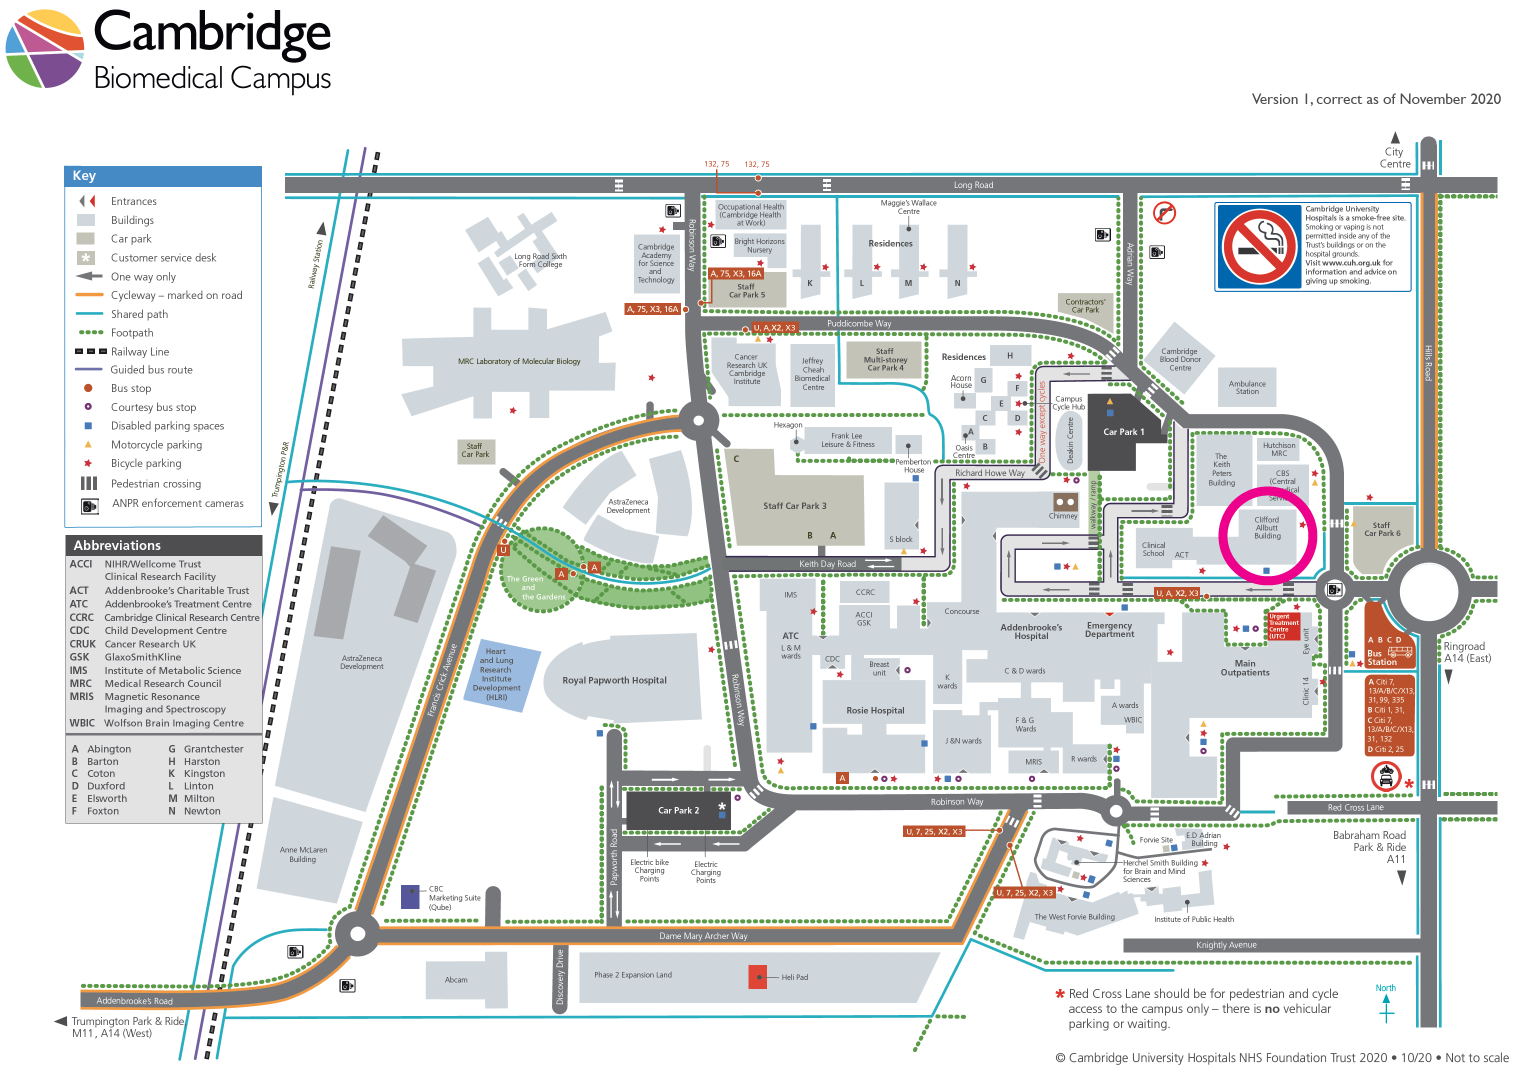 Map of the Cambridge Biomedical Campus with the Clifford Allbutt Building highlighted by a pink circle.